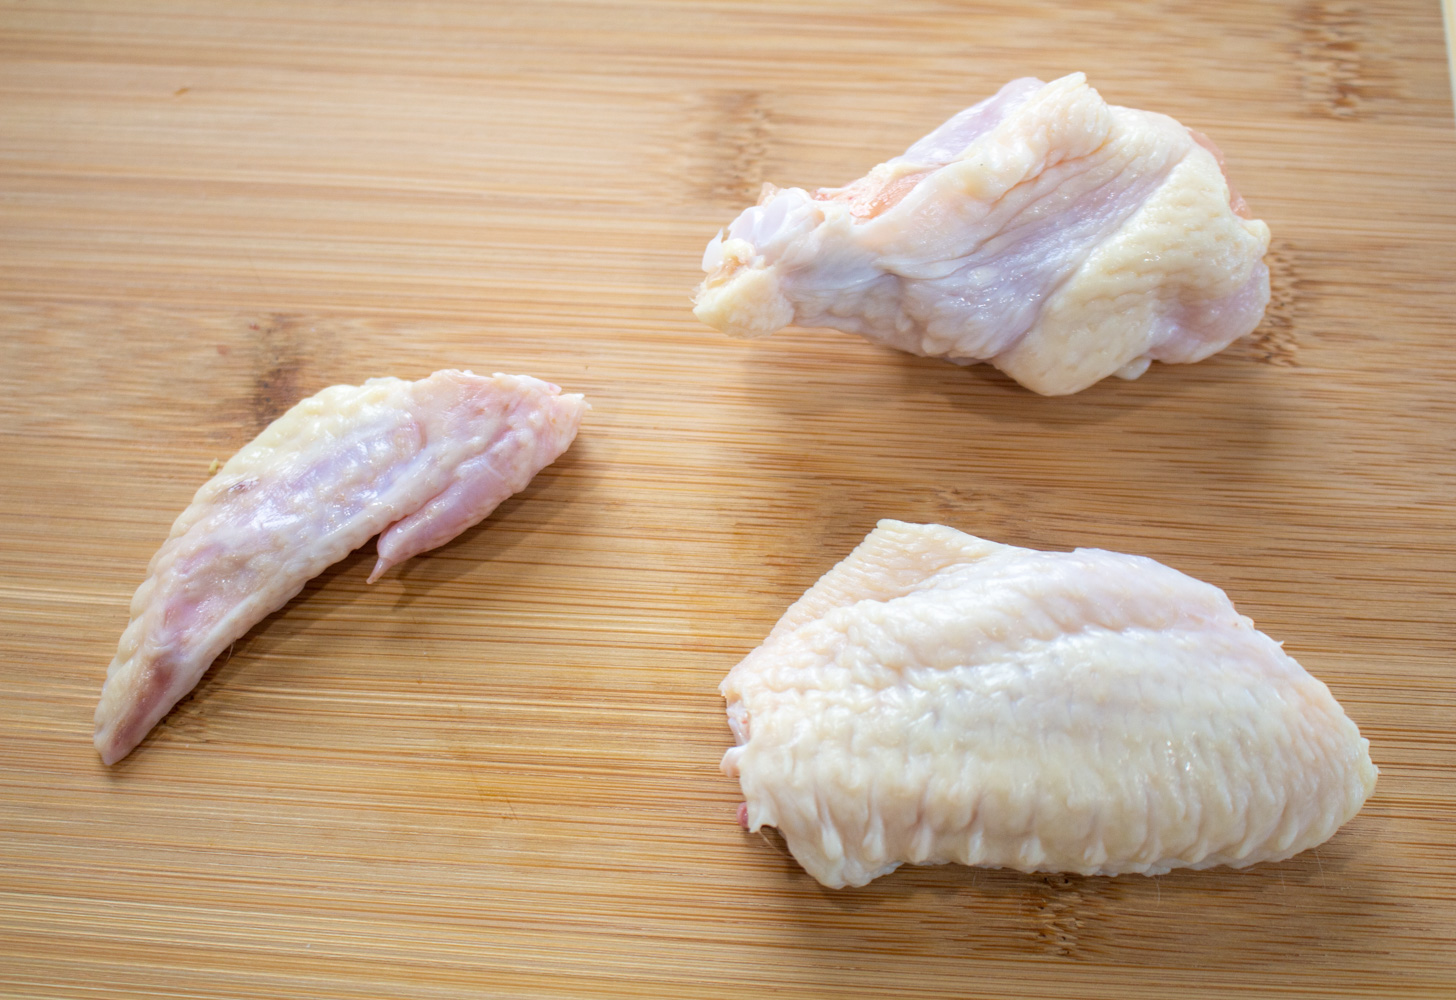 a butchered chicken wing separated into parts: wing, drumette, and wing tip